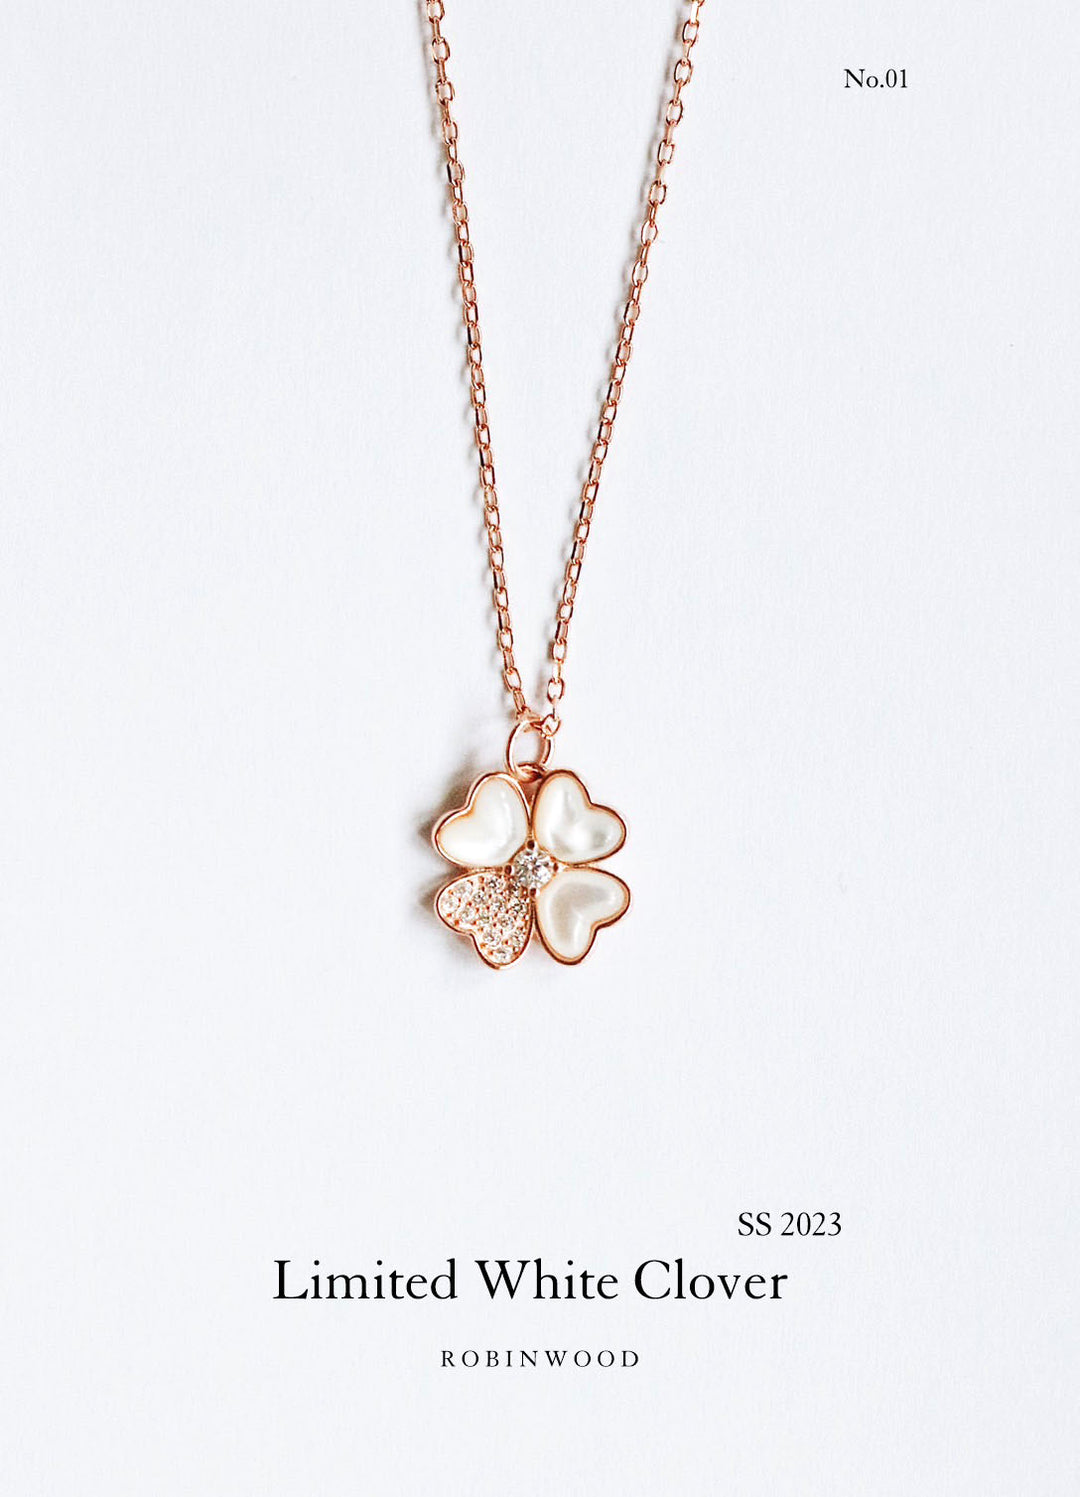 Limited Collection's " Swarovski White Clover " , Robinwood, Masterpieces Design